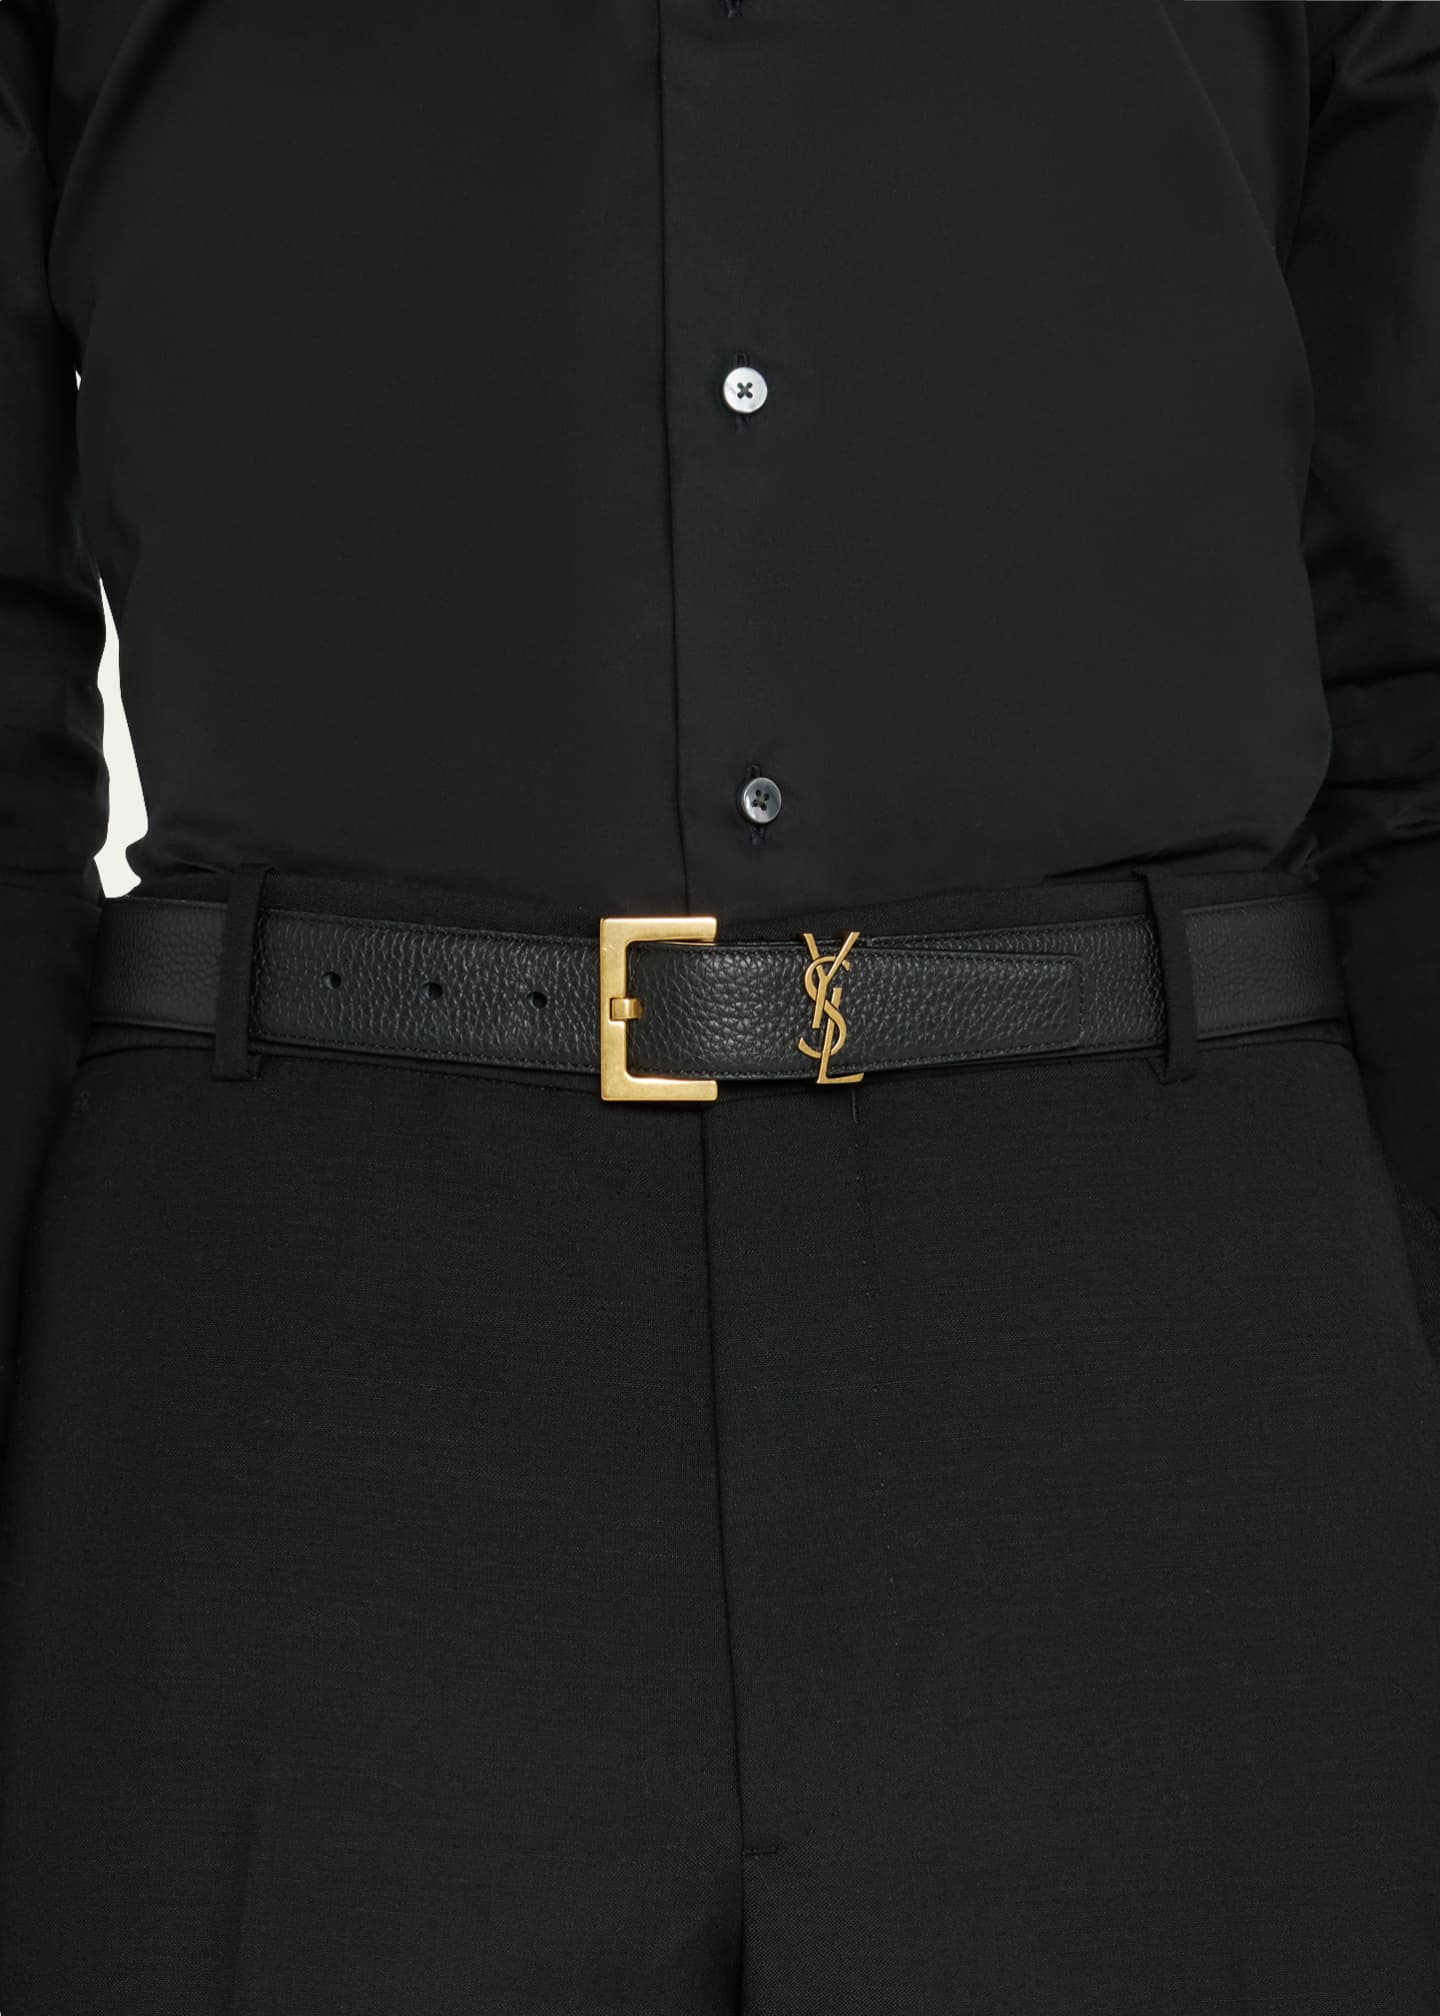 ysl belt womens outfit